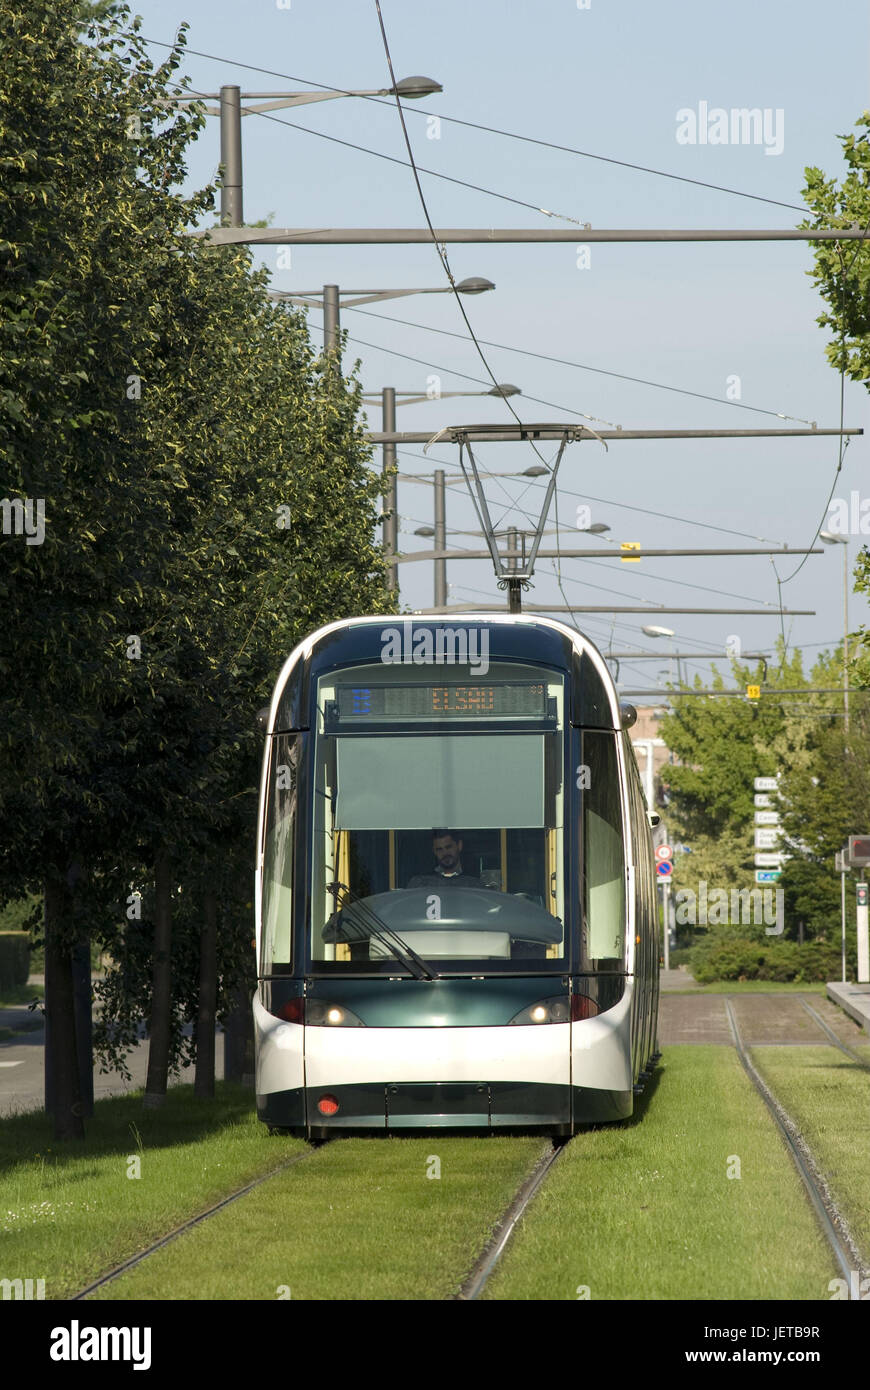 France, Alsace, home Schiltig, tram, Europe, destination, town, means of transportation, publicly, trajectory, rail transport, short-distance traffic, outside, meadow, green areas, drivers, tram drivers, sun visor, person, luminous display, Stock Photo